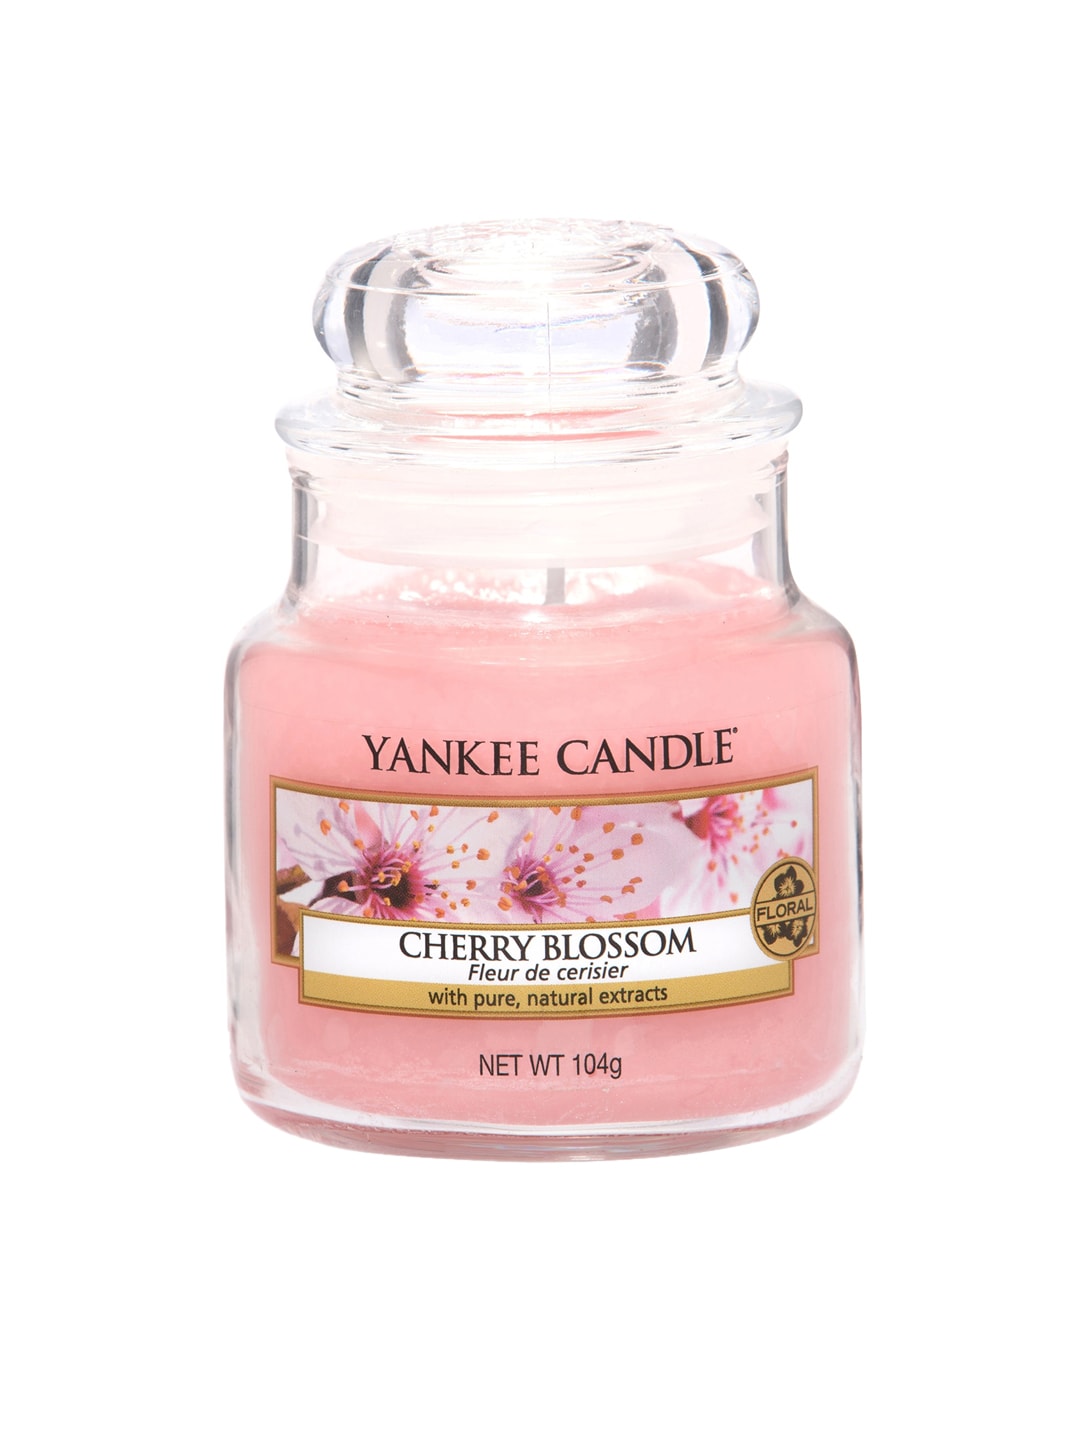 YANKEE CANDLE Pink Classic Small Jar Cherry Blossom Scented Candles Price in India